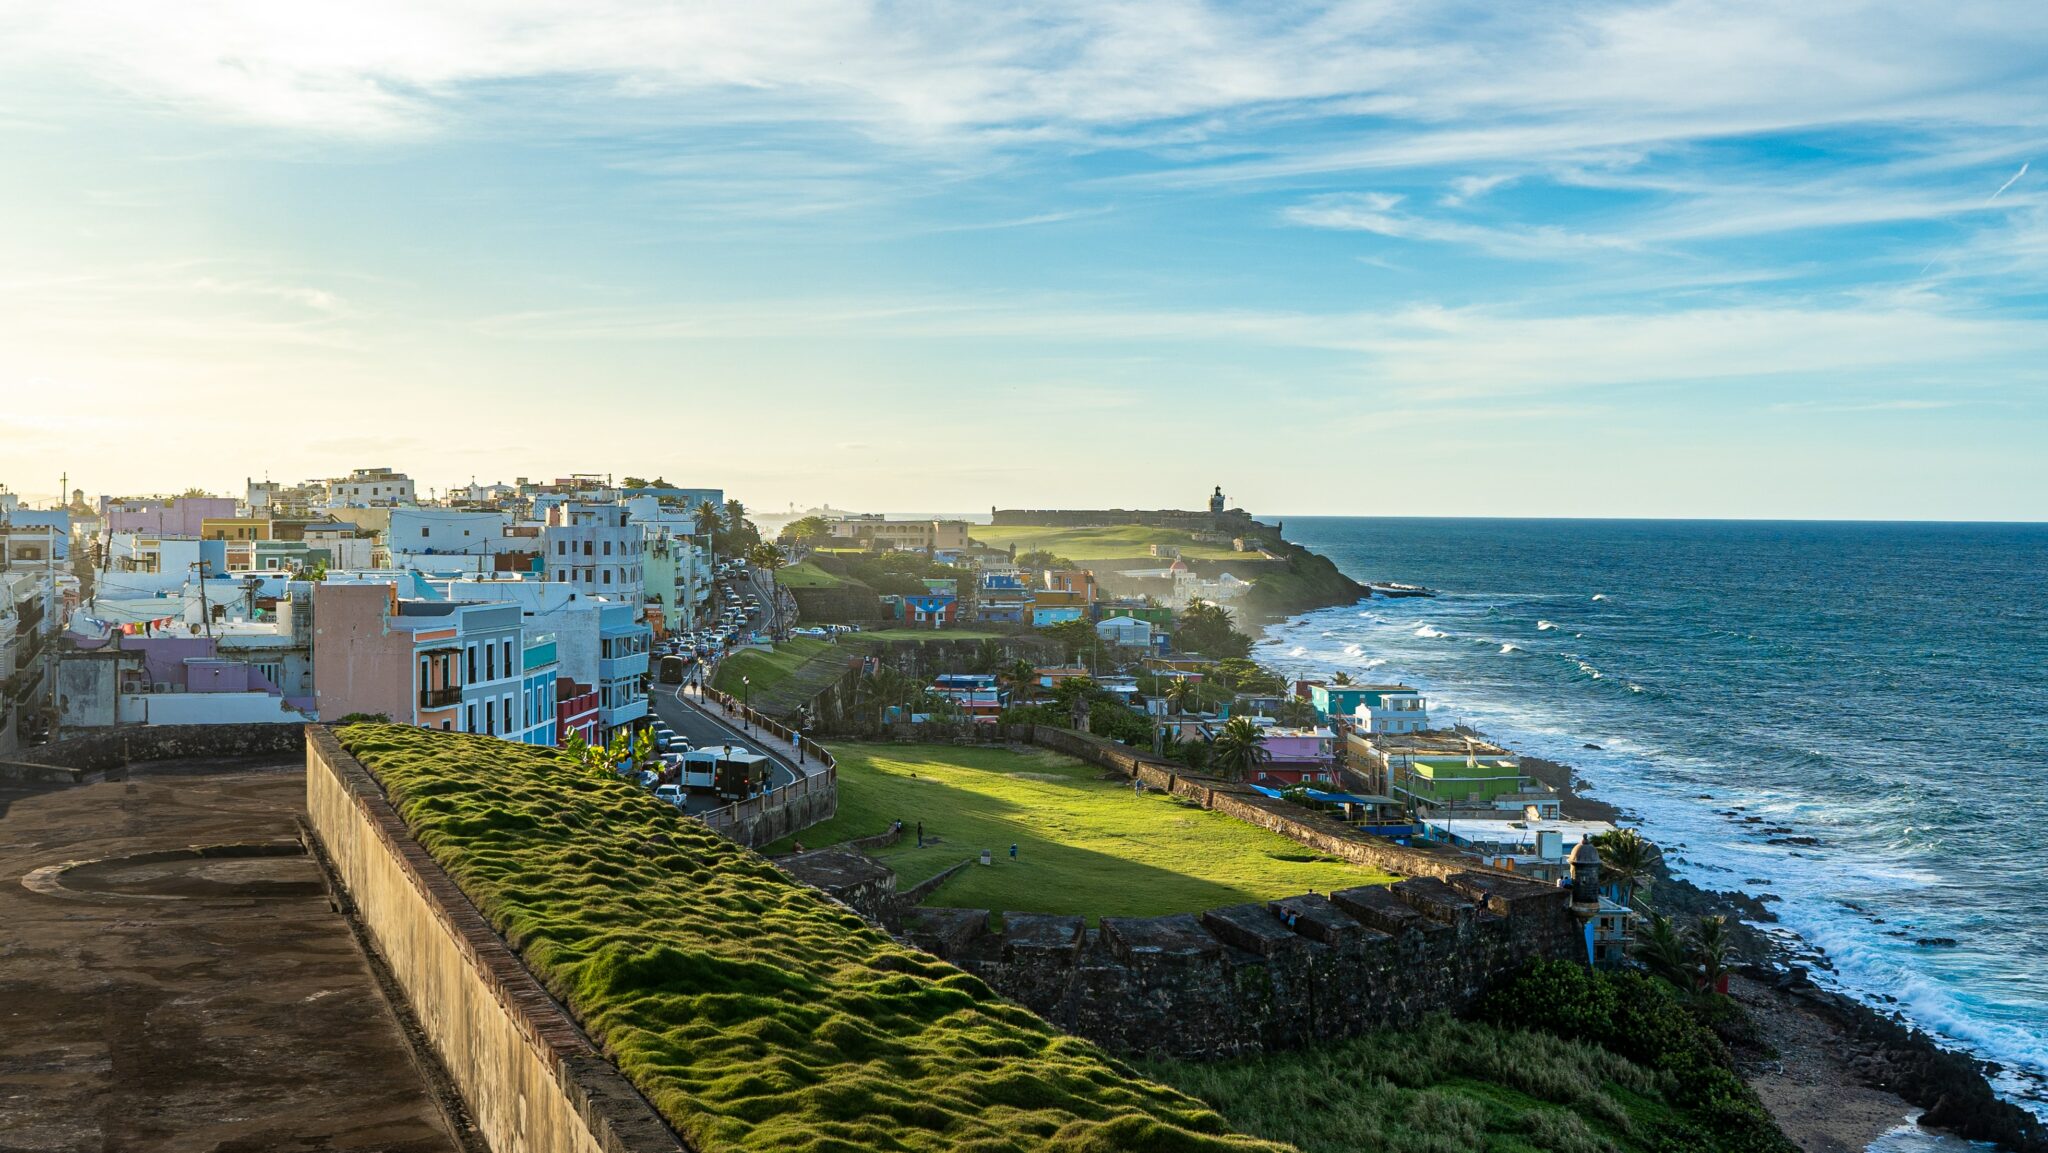 San Juan, the capital of Puerto Rico, where payroll outsourcing could be a good option for streamlining your business operations